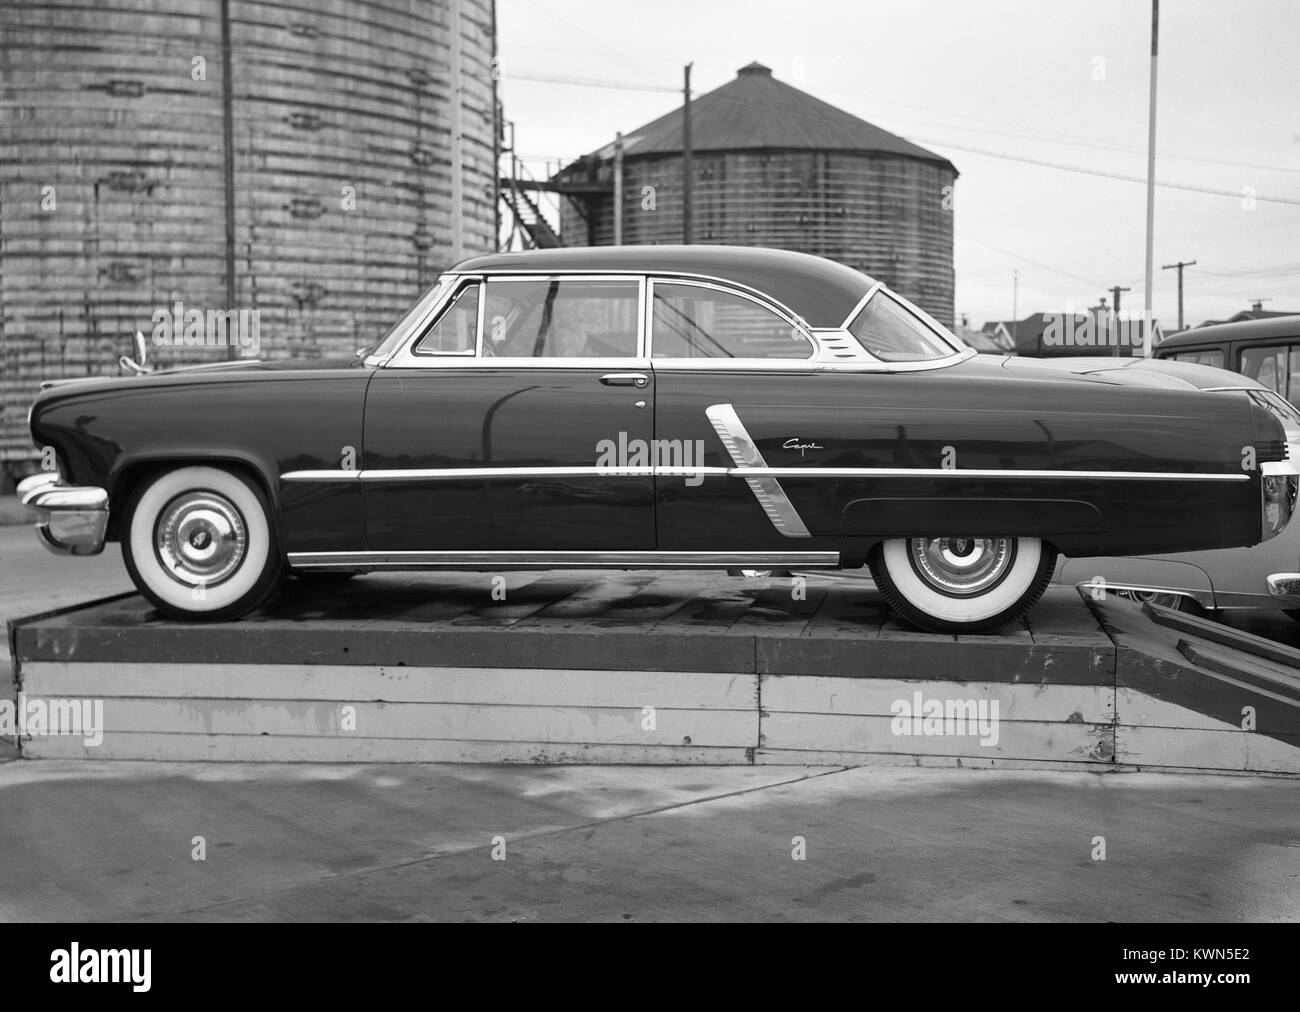 A then-new Lincoln Capri automobile is displayed on a pedestal with silos in the background, at Henderson Center Motors, a car dealership in Eureka, California, 1950. Stock Photo